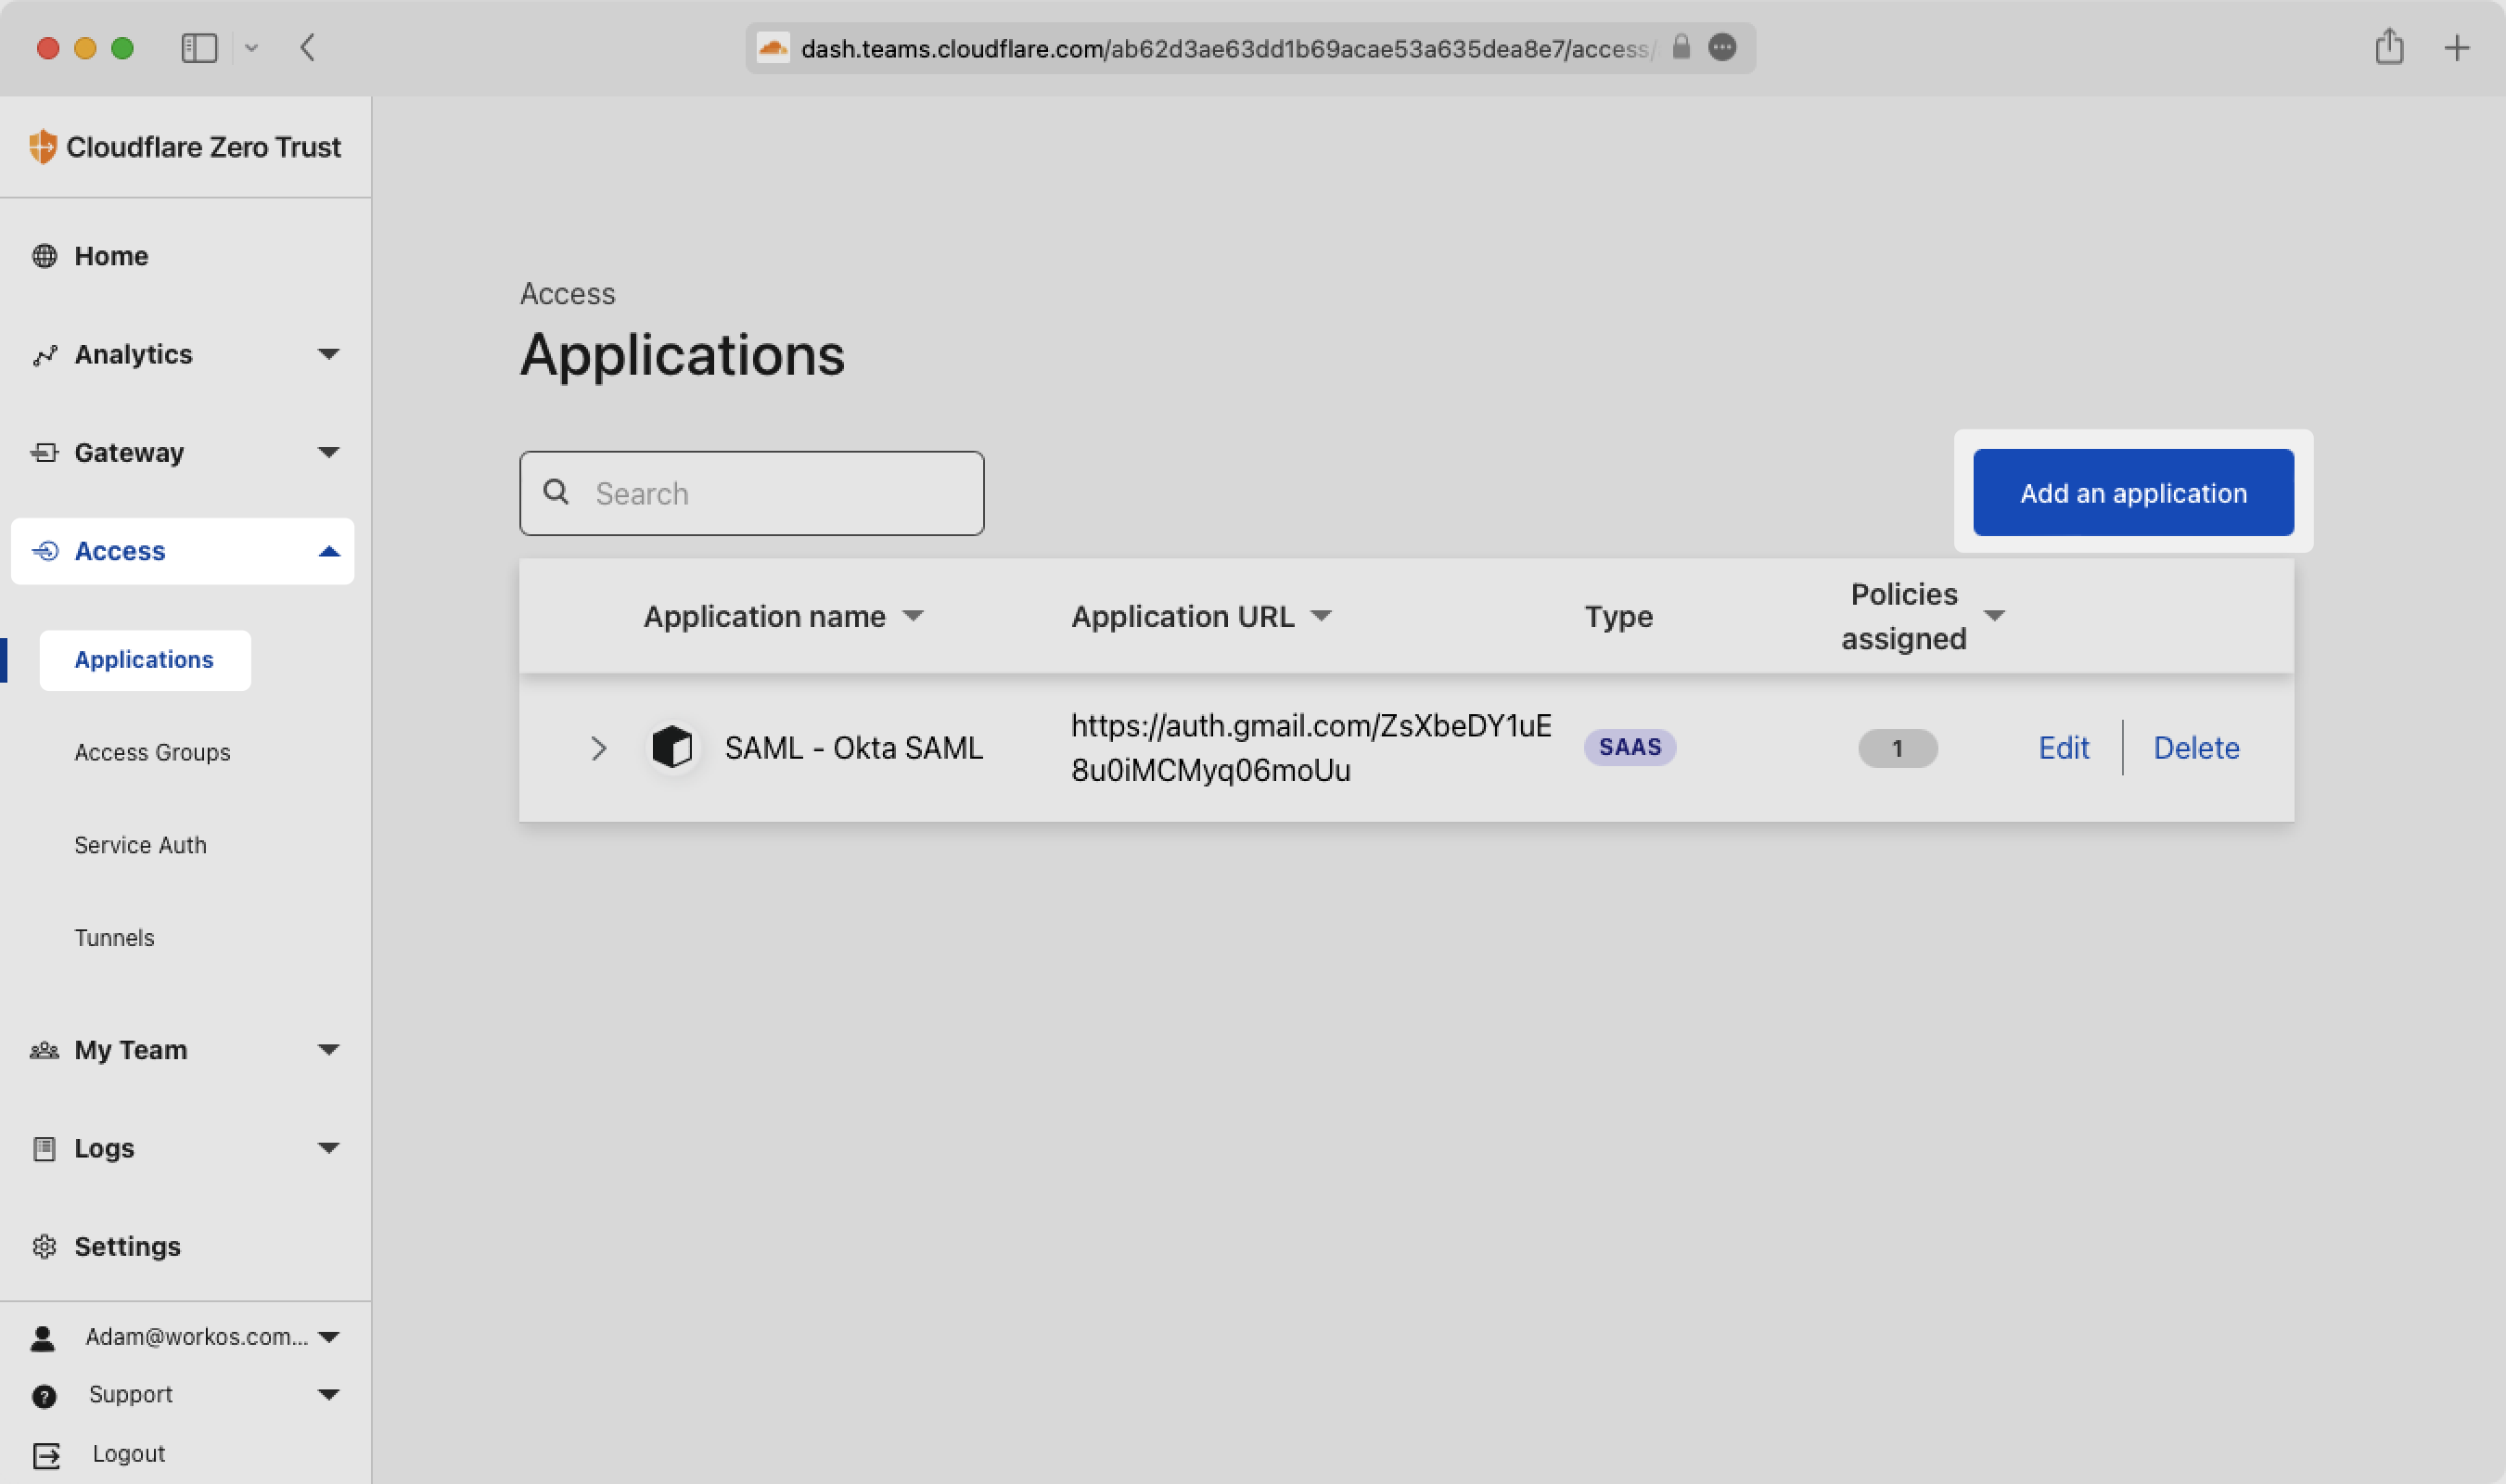 A screenshot showing where to add an application in Cloudflare Access.